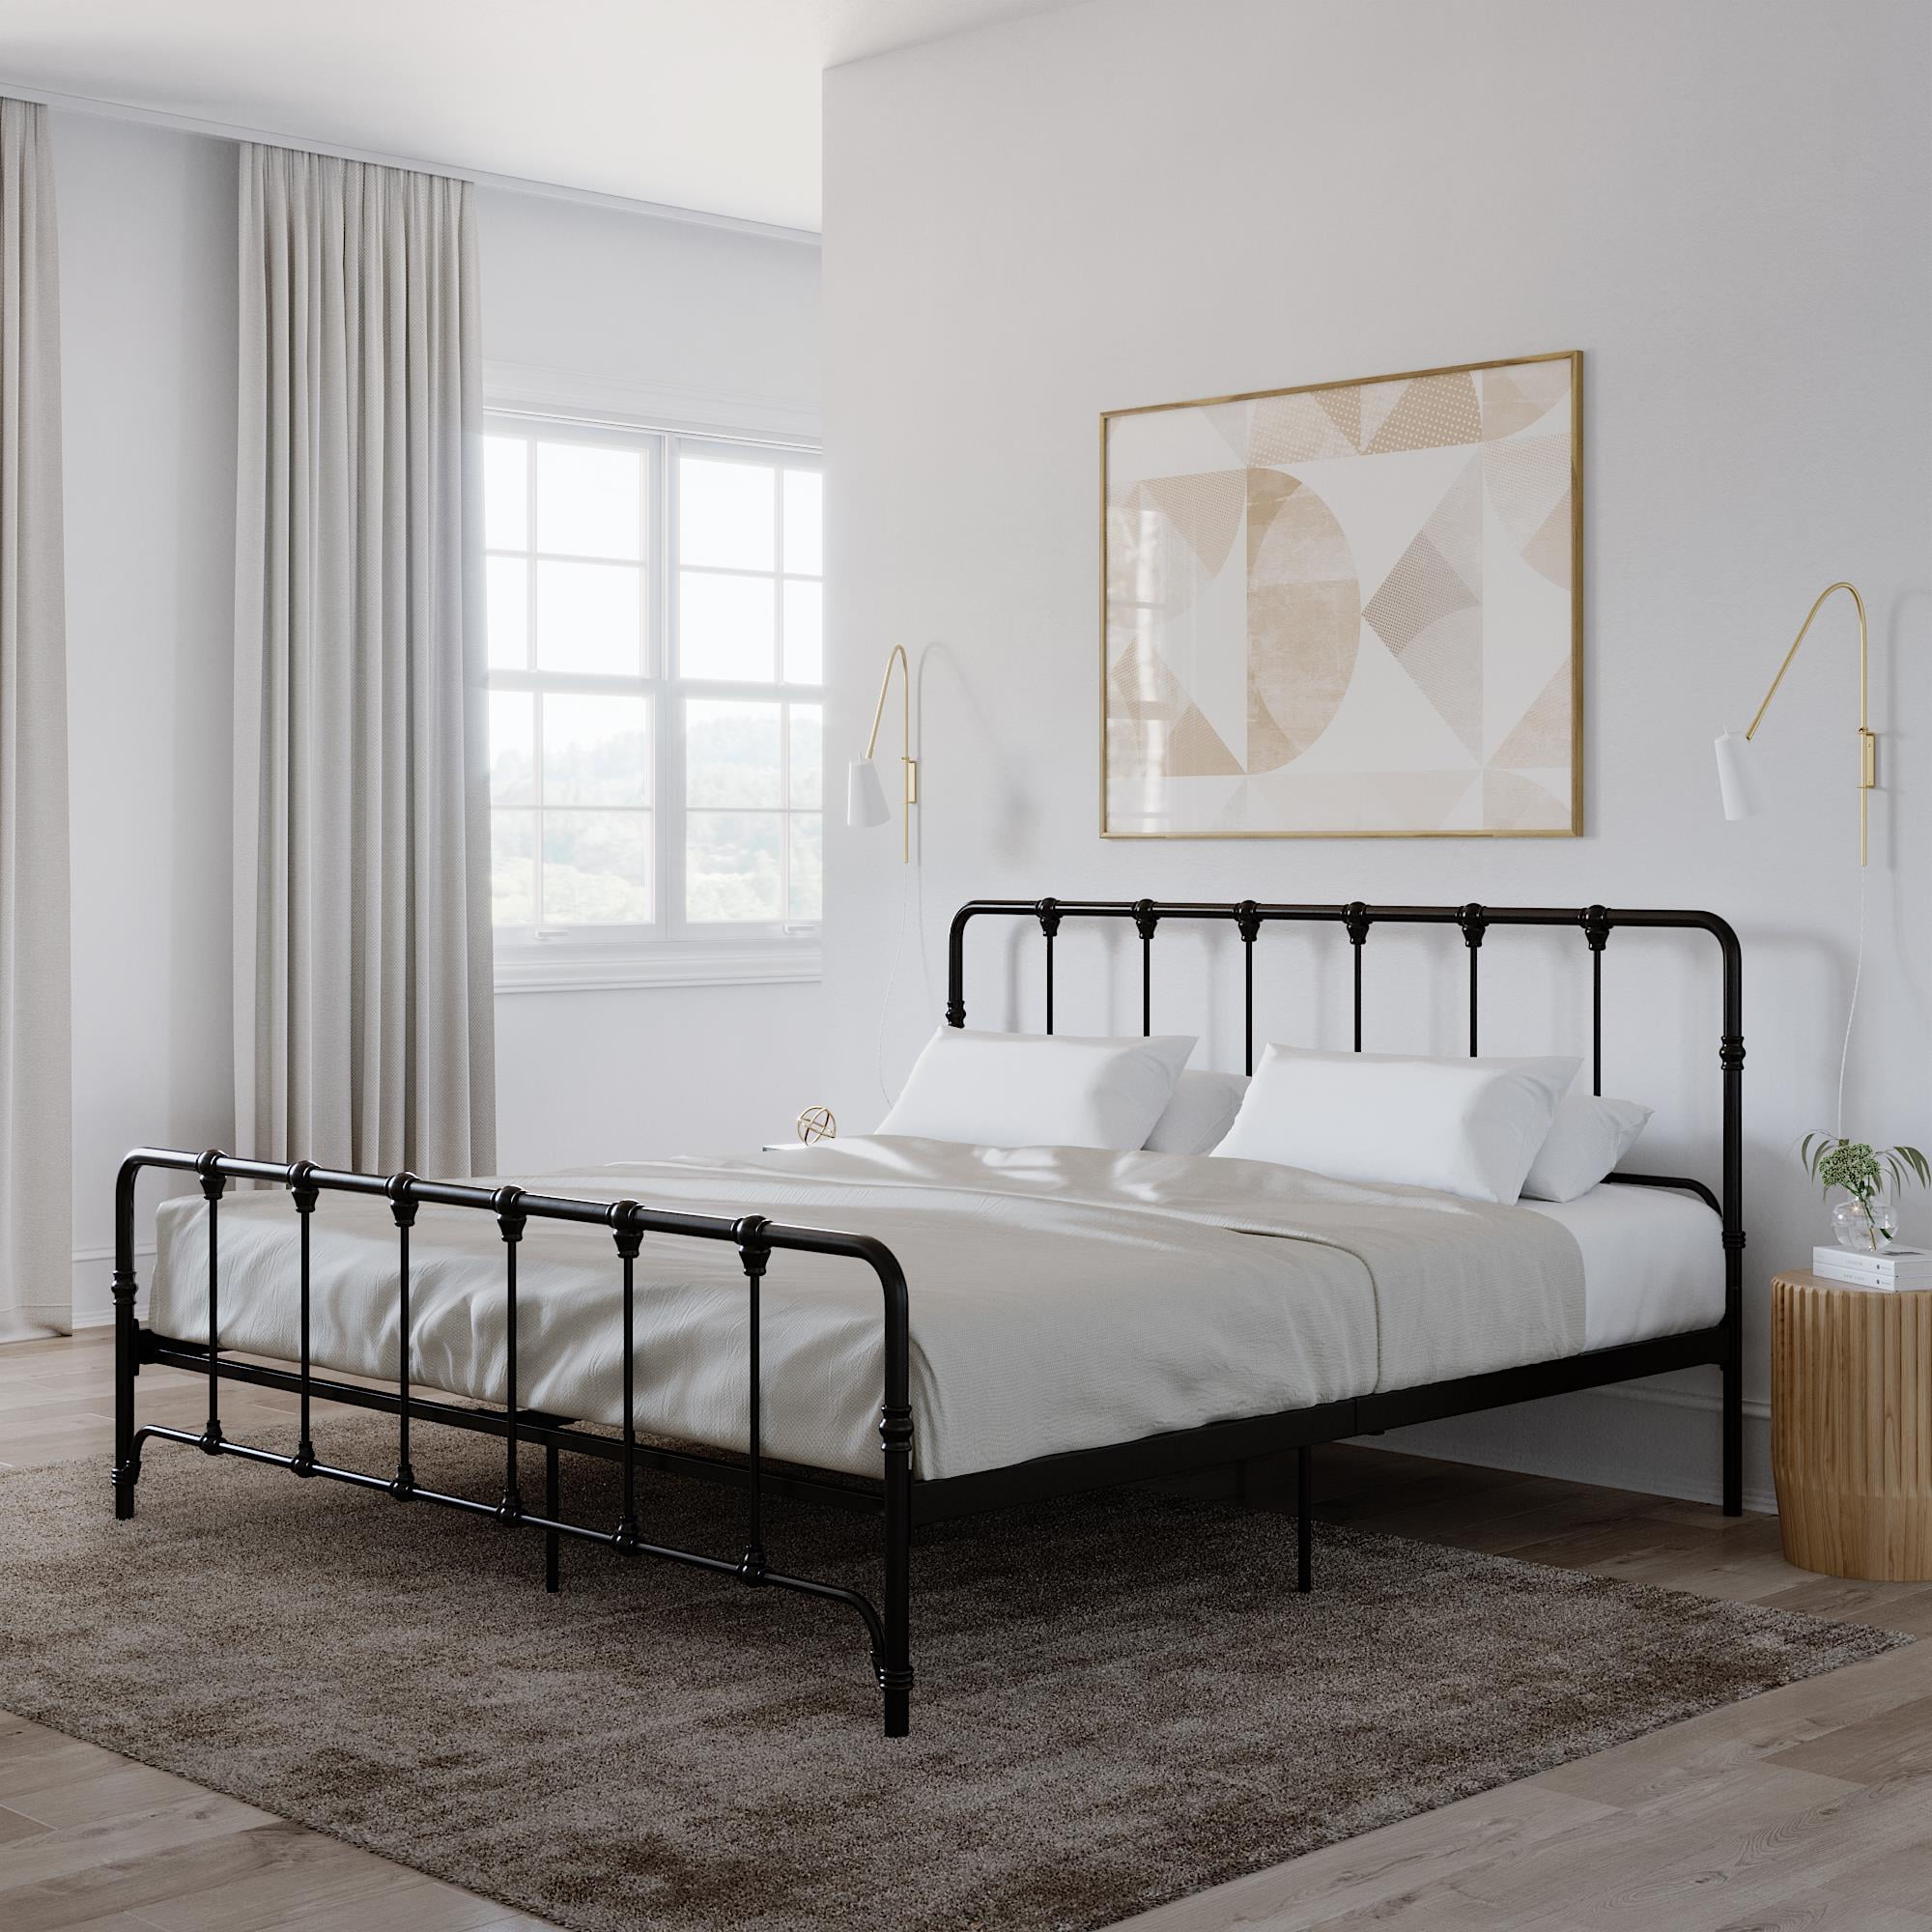 Mainstays Farmhouse Metal Bed King, King Size Metal Bed Rails